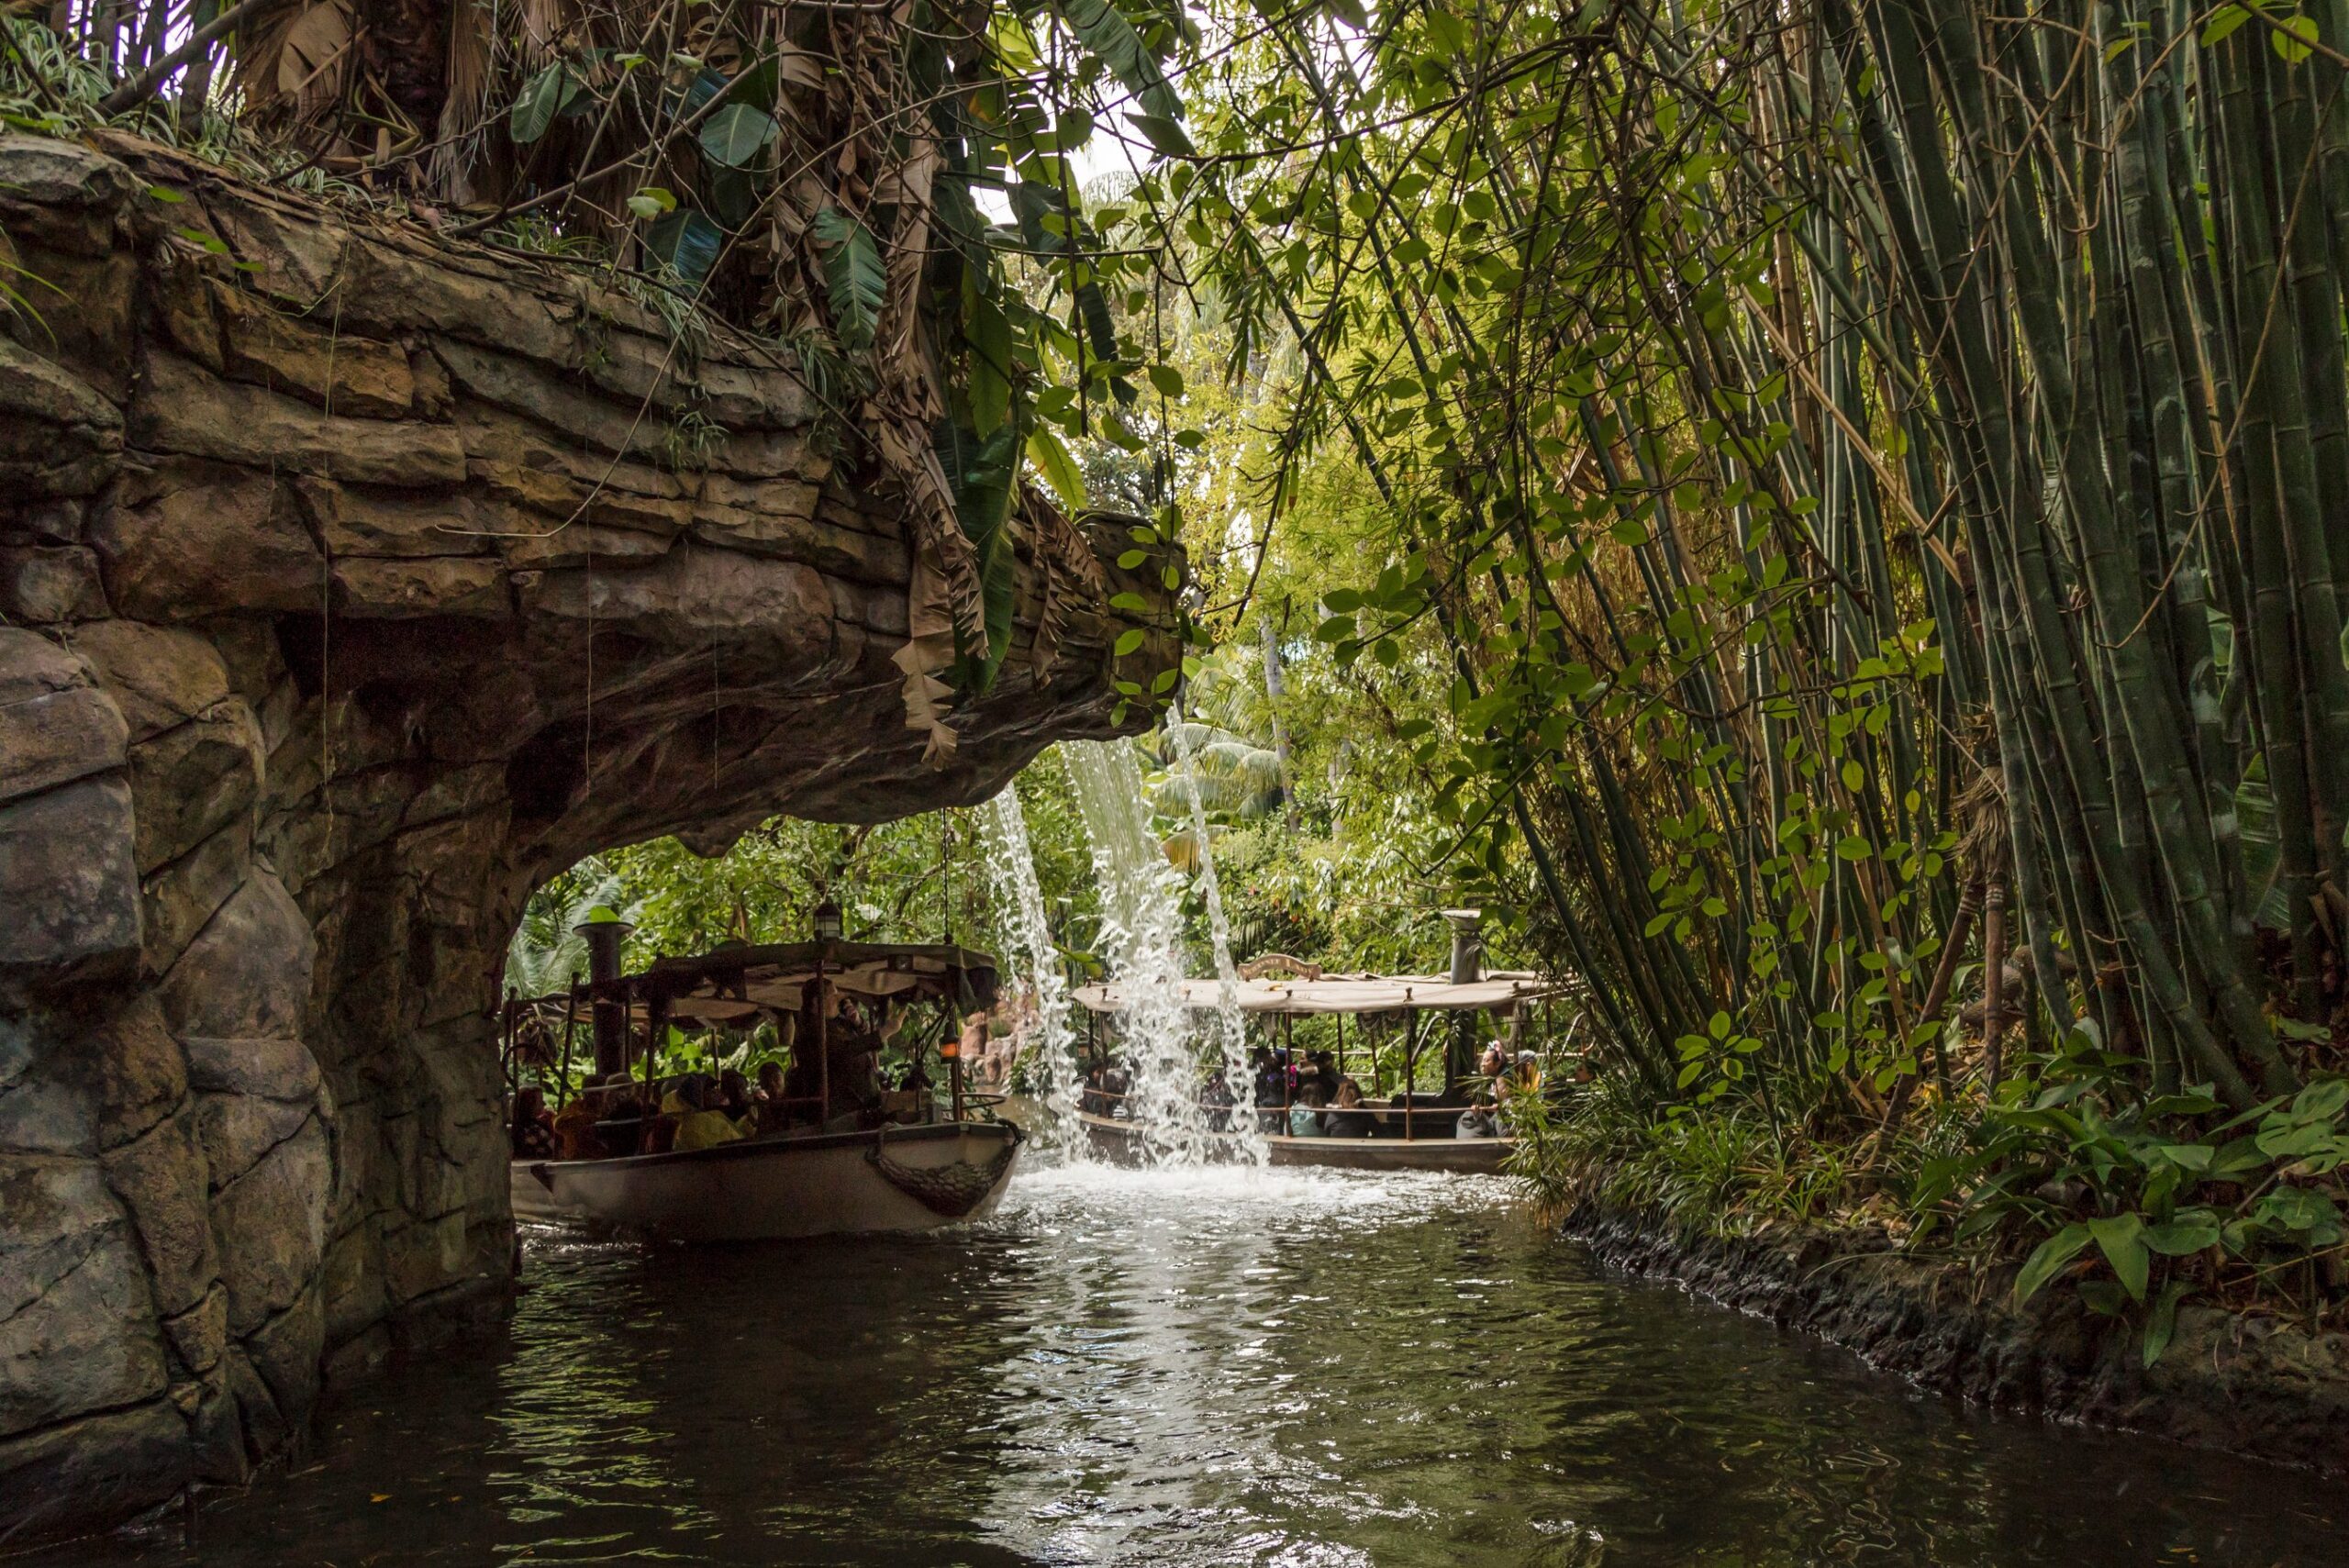 The world-famous Jungle Cruise at Disneyland Park invites guests to board a canopied tramp steamer and leave civilization behind on a tongue-in-cheek journey through the globeÕs most ÒtreacherousÓ riversÑand oldest gags, where the animals get the last laugh. (Joshua Sudock/Disneyland Resort)